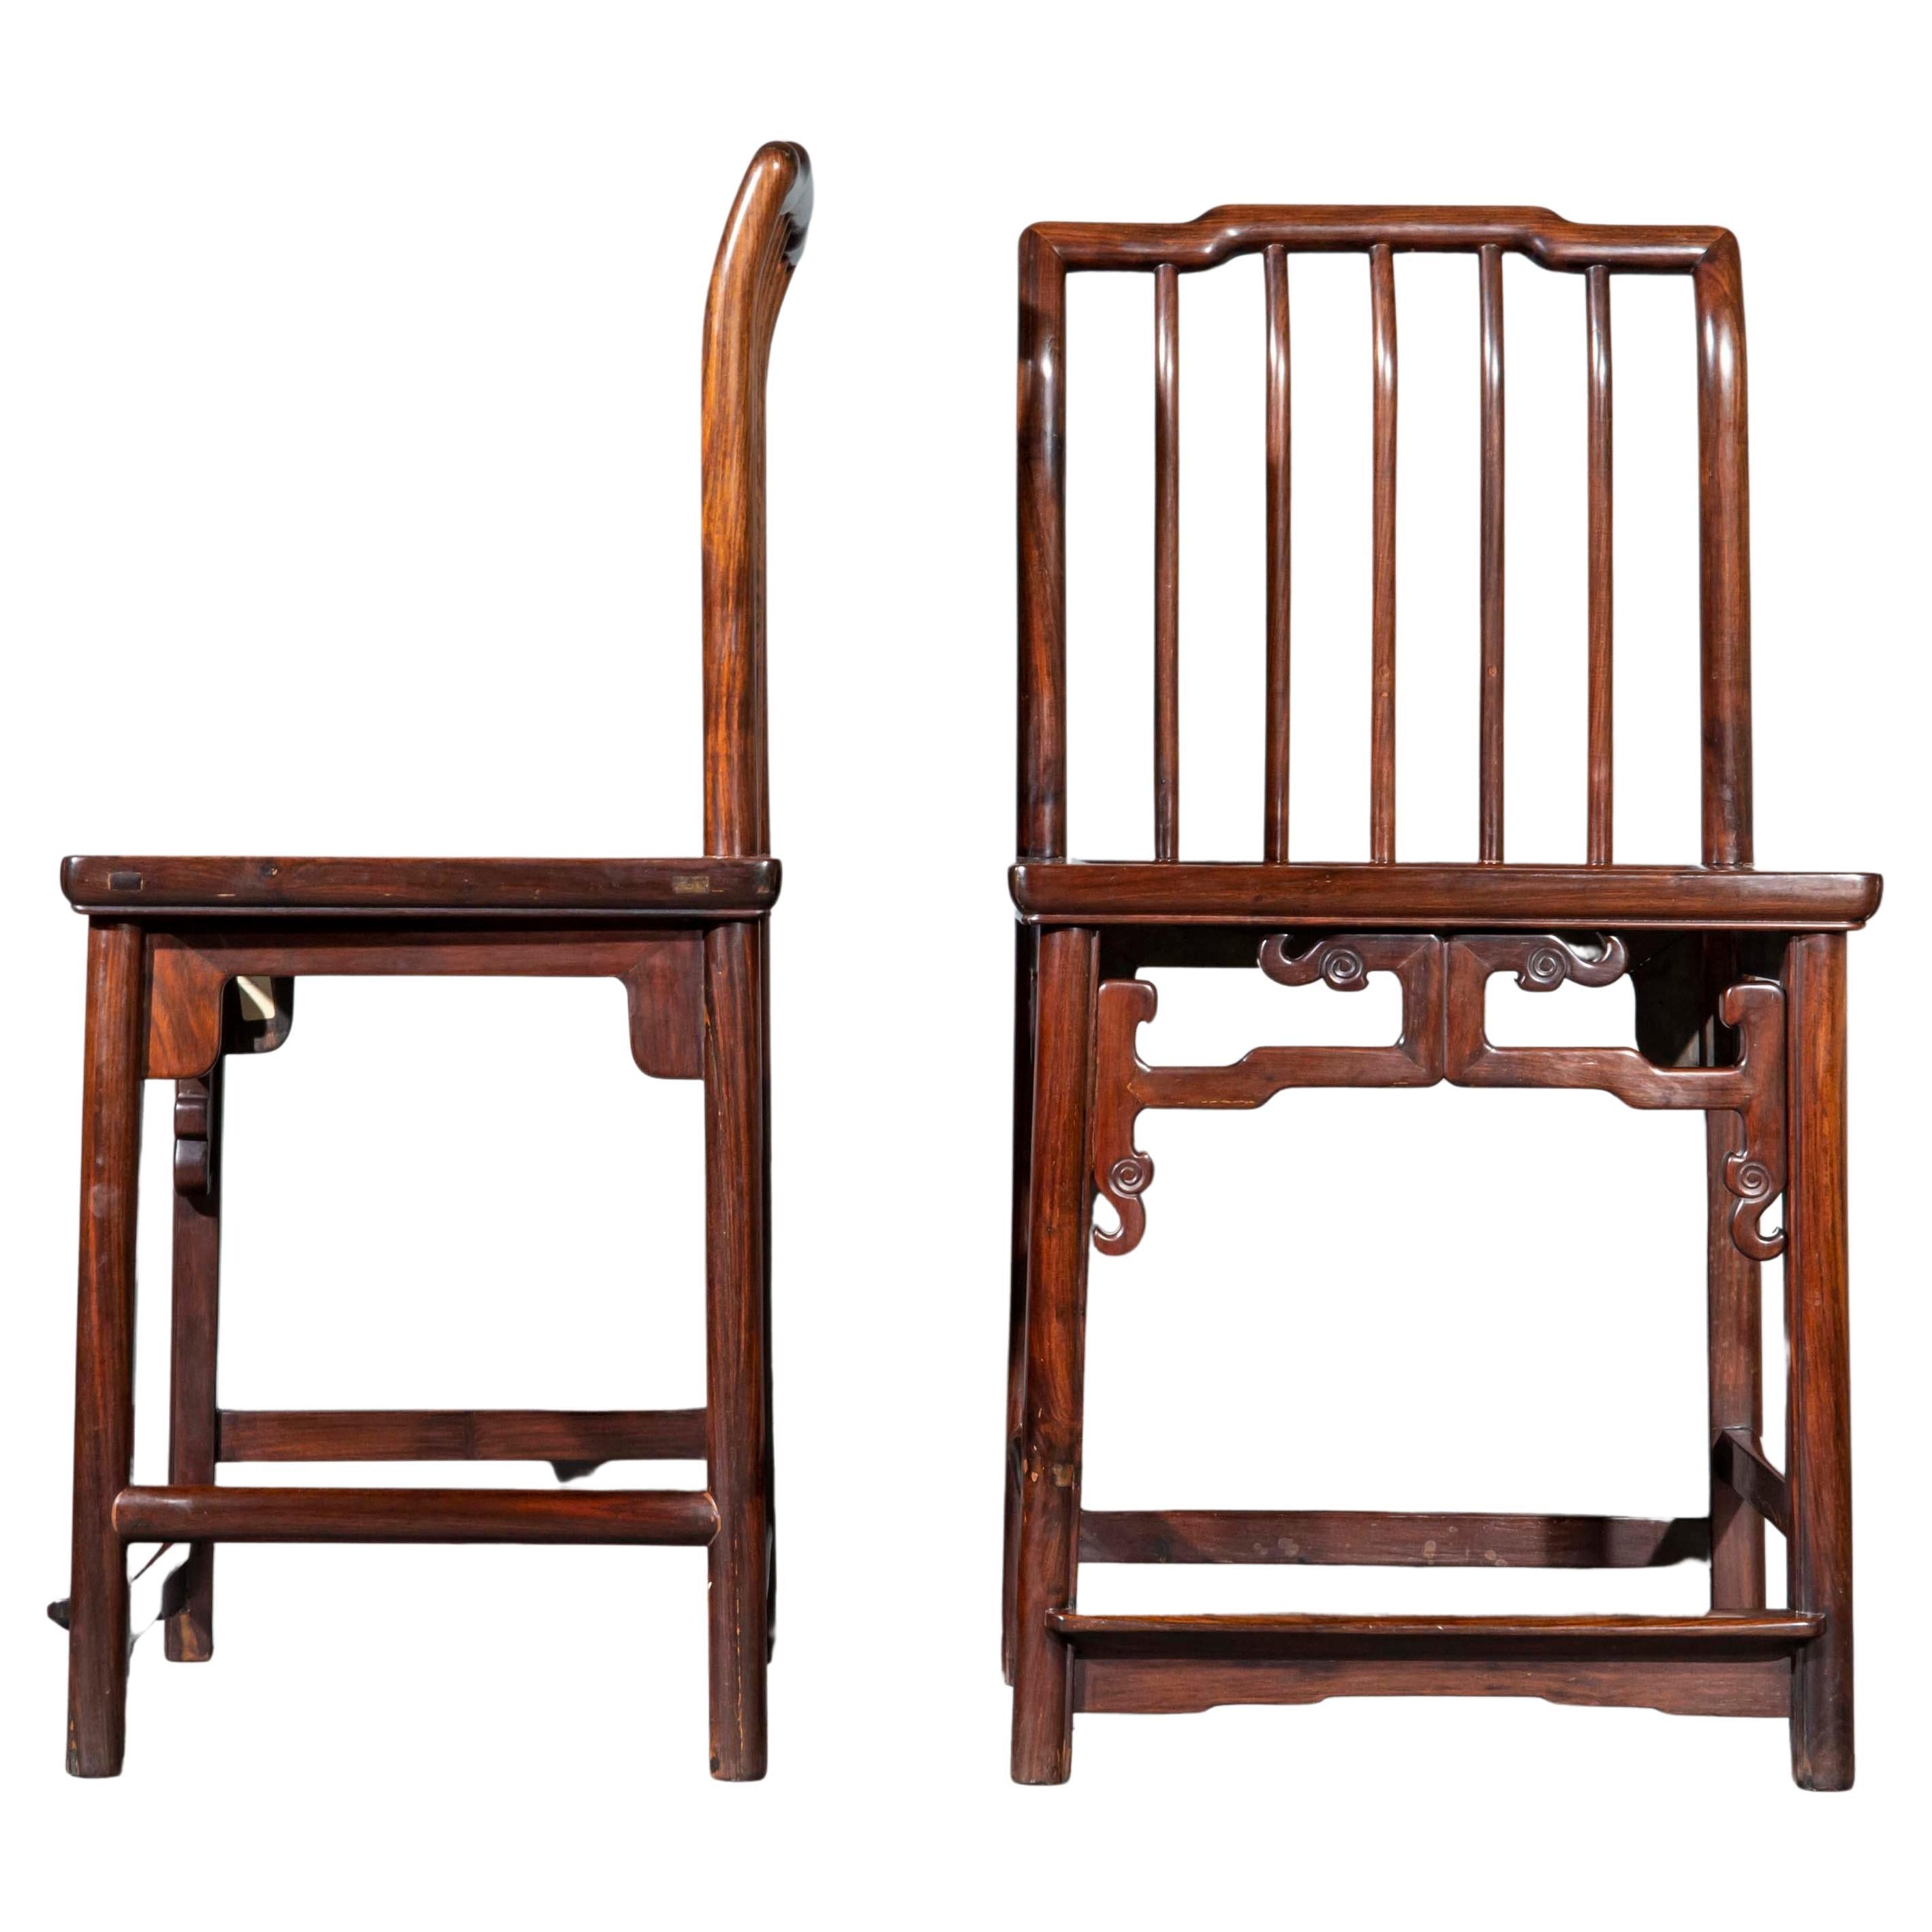 Pair of Low Back Side Chairs or Meiguiyi, 19th Century